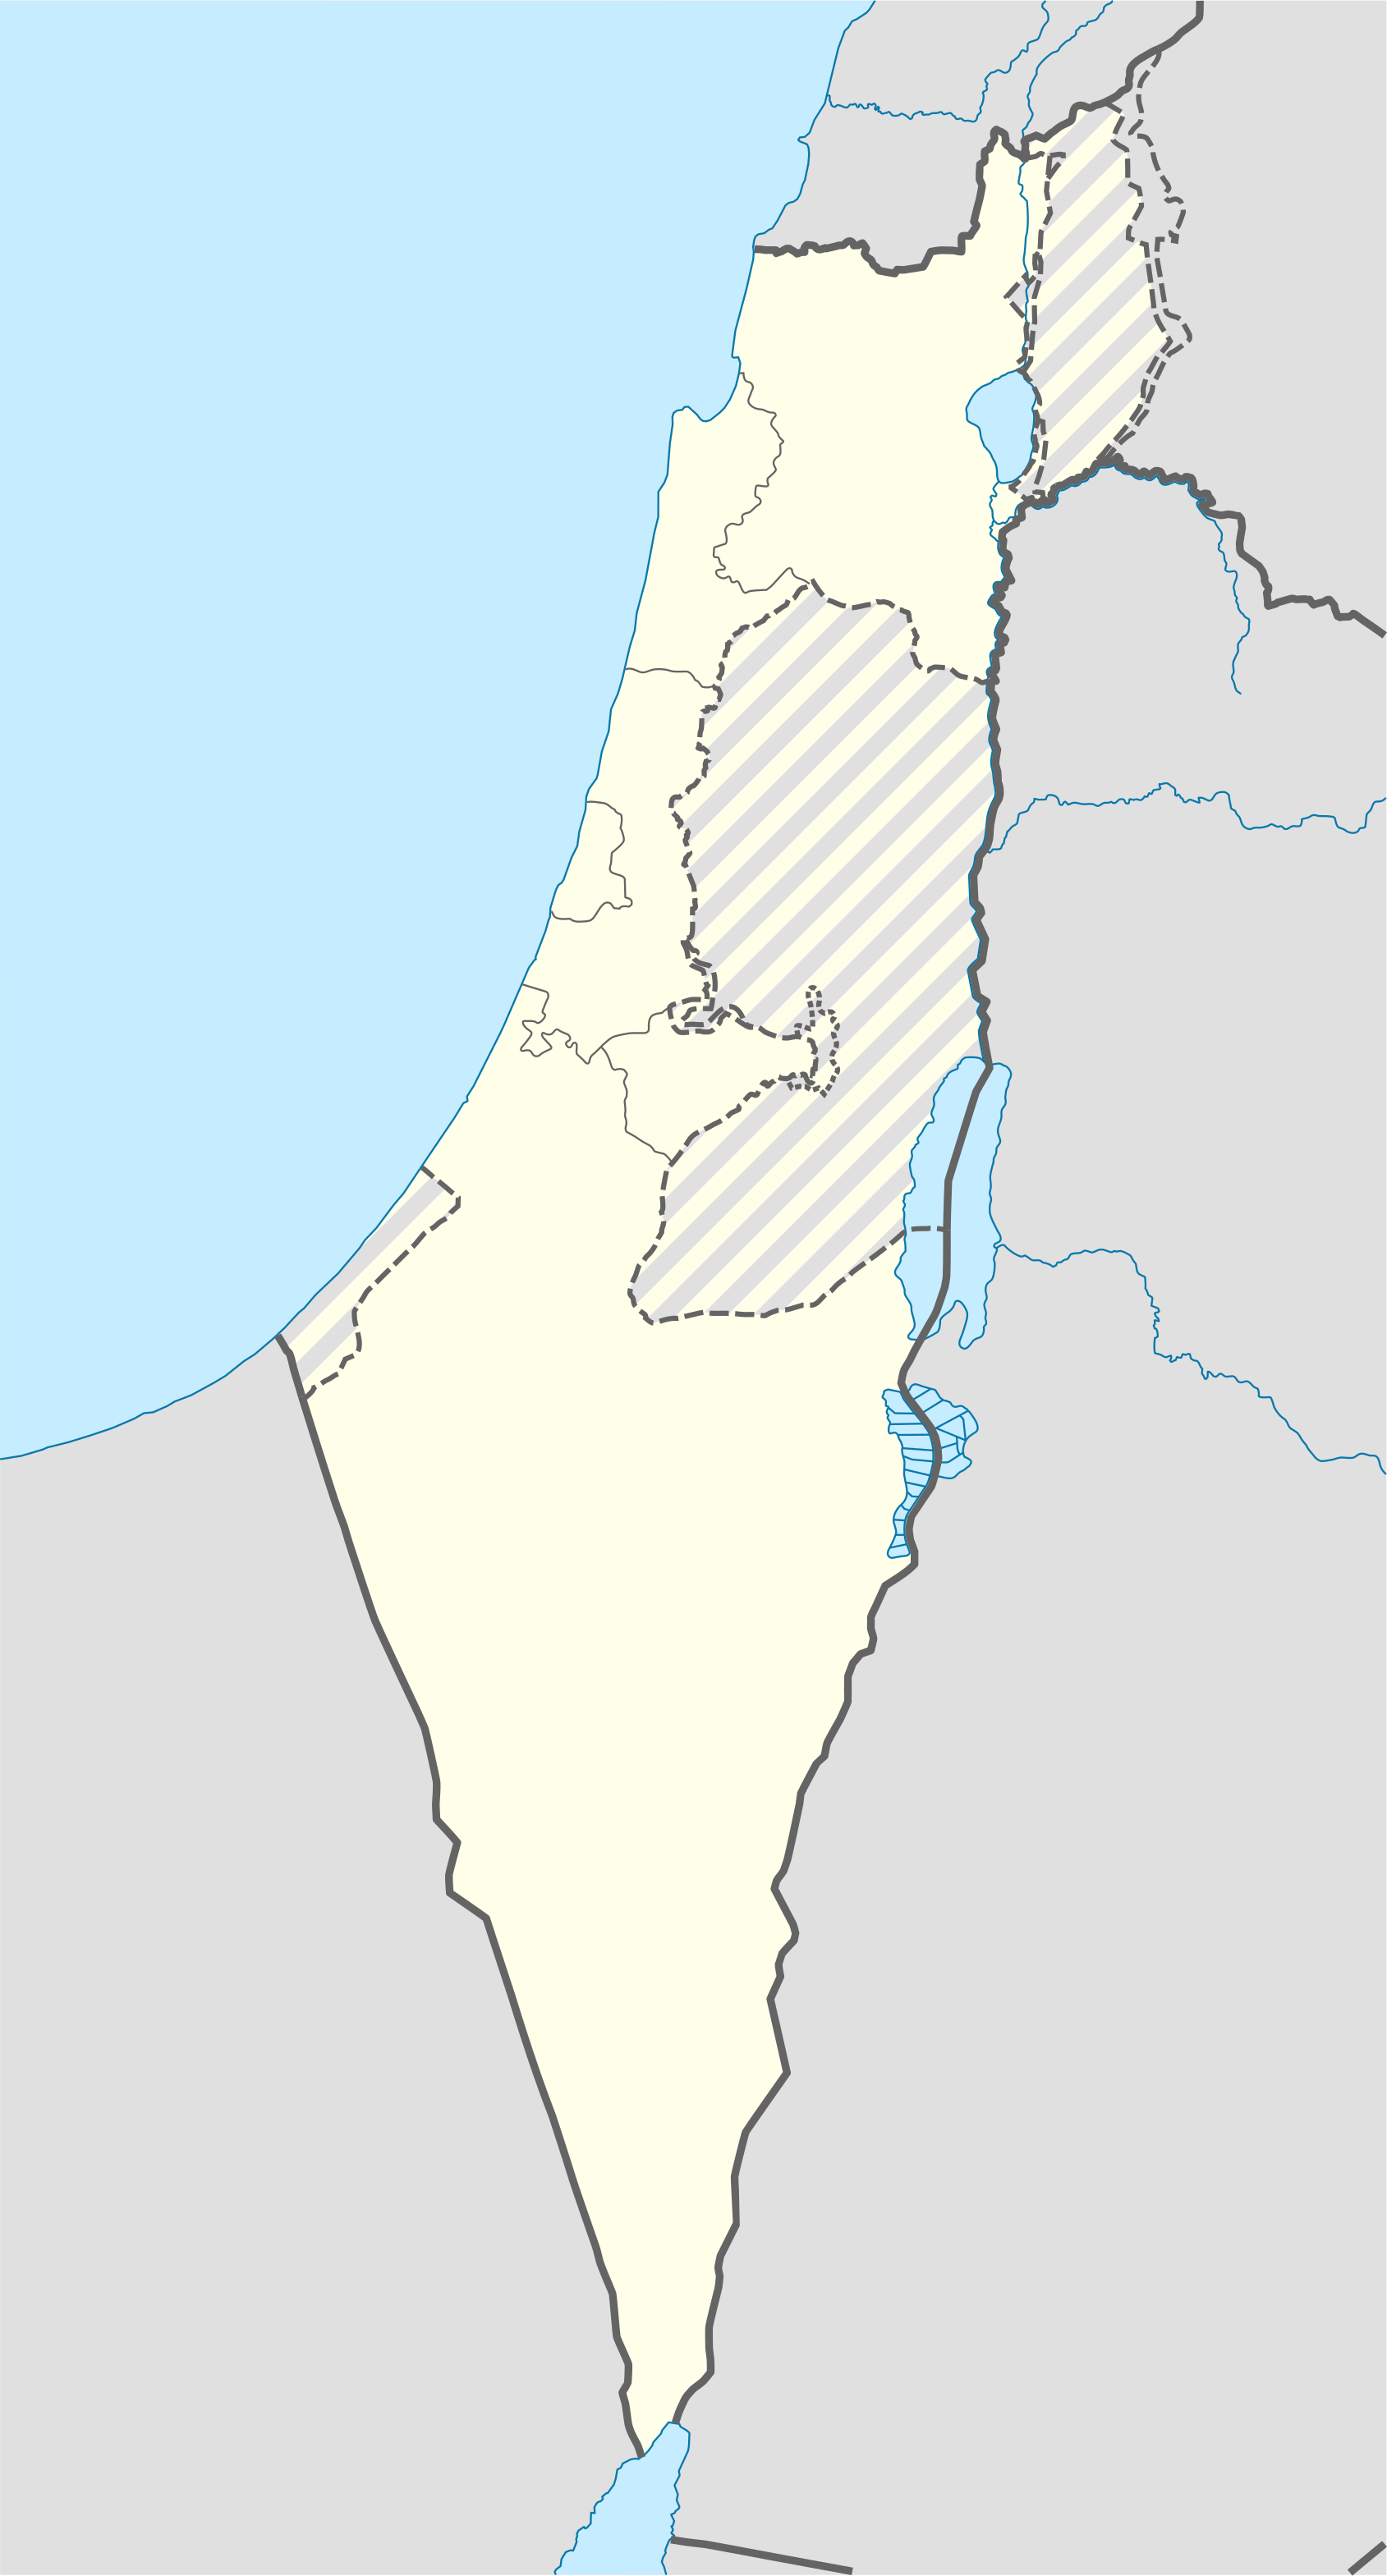 Bolter21/Jewish and Arab localities in Israel is located in Israel